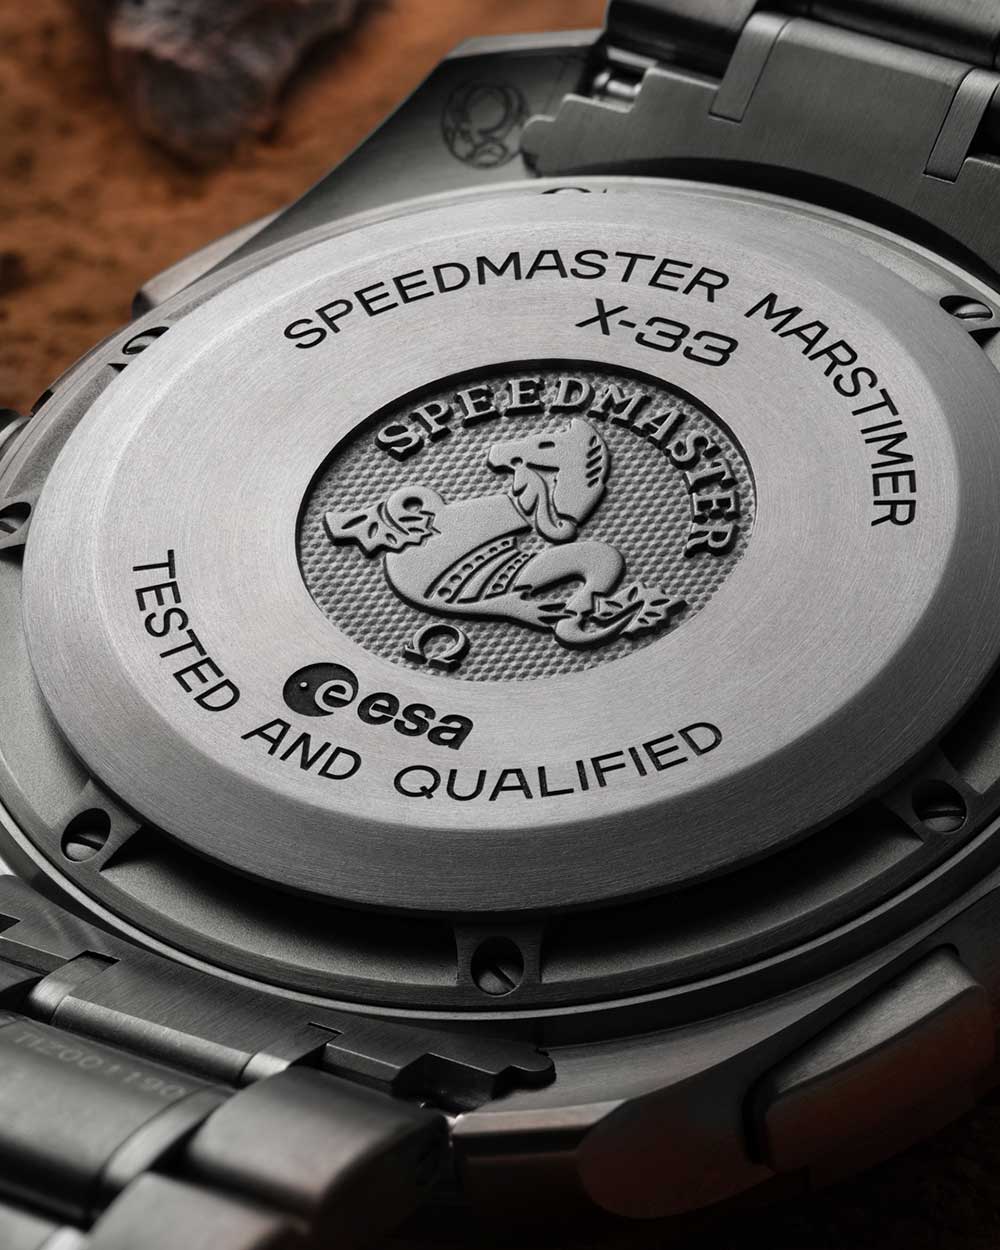 The case back reveals OMEGA's traditional seahorse and the logo of the European Space Agency